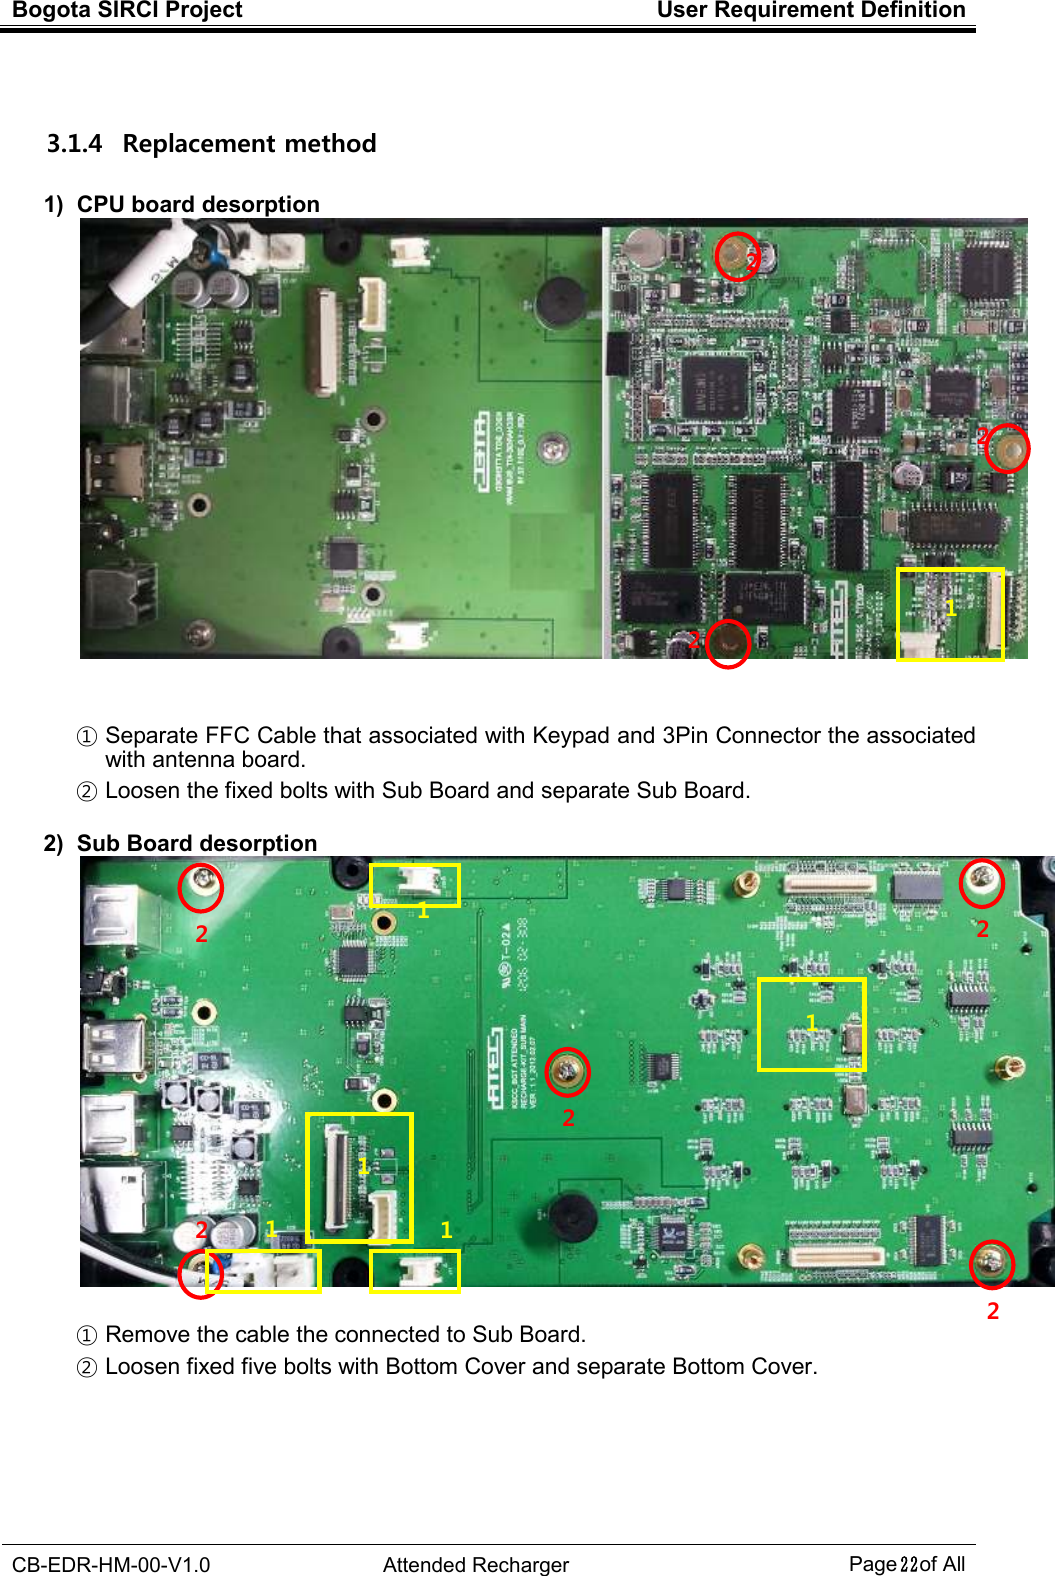 Bogota SIRCI Project  User Requirement Definition  CB-EDR-HM-00-V1.0  Attended Recharger Page２２ of All   3.1.4   Replacement method 1)  CPU board desorption    ①Separate FFC Cable that associated with Keypad and 3Pin Connector the associated with antenna board. ②Loosen the fixed bolts with Sub Board and separate Sub Board.  2)  Sub Board desorption   ①Remove the cable the connected to Sub Board. ②Loosen fixed five bolts with Bottom Cover and separate Bottom Cover.       1    2 2 2 2 2 1 1 1 1 1 2 2 2 